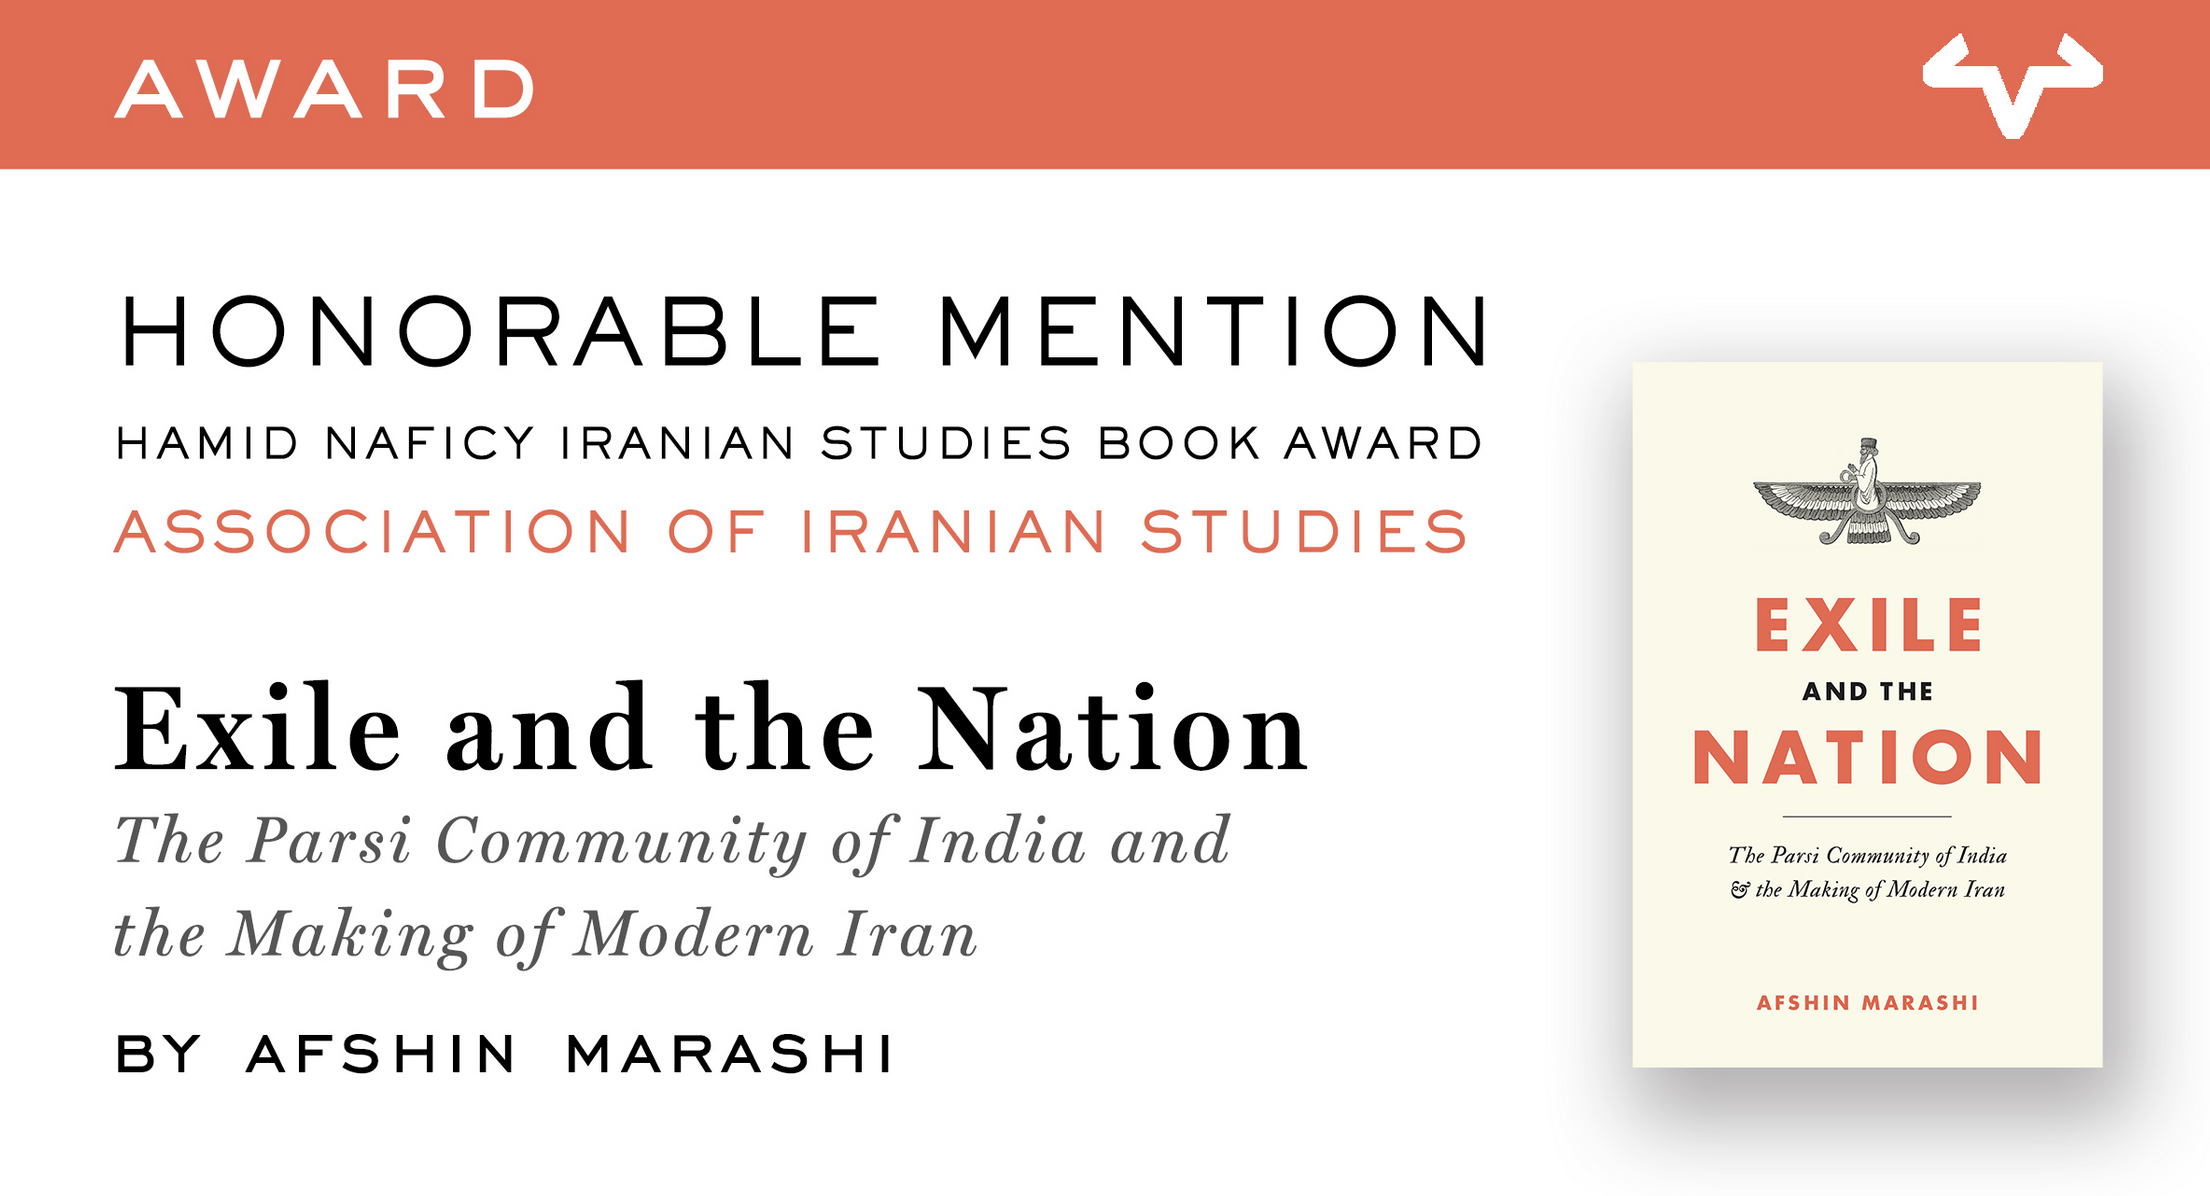 Award: Honorable Mention, Hamid Naficy Iranian Studies Book Award, Association of Iranian Studies, Exile and the Nation: The Parsi Community of India and the Making of Modern Iran, by Afshin Marashi